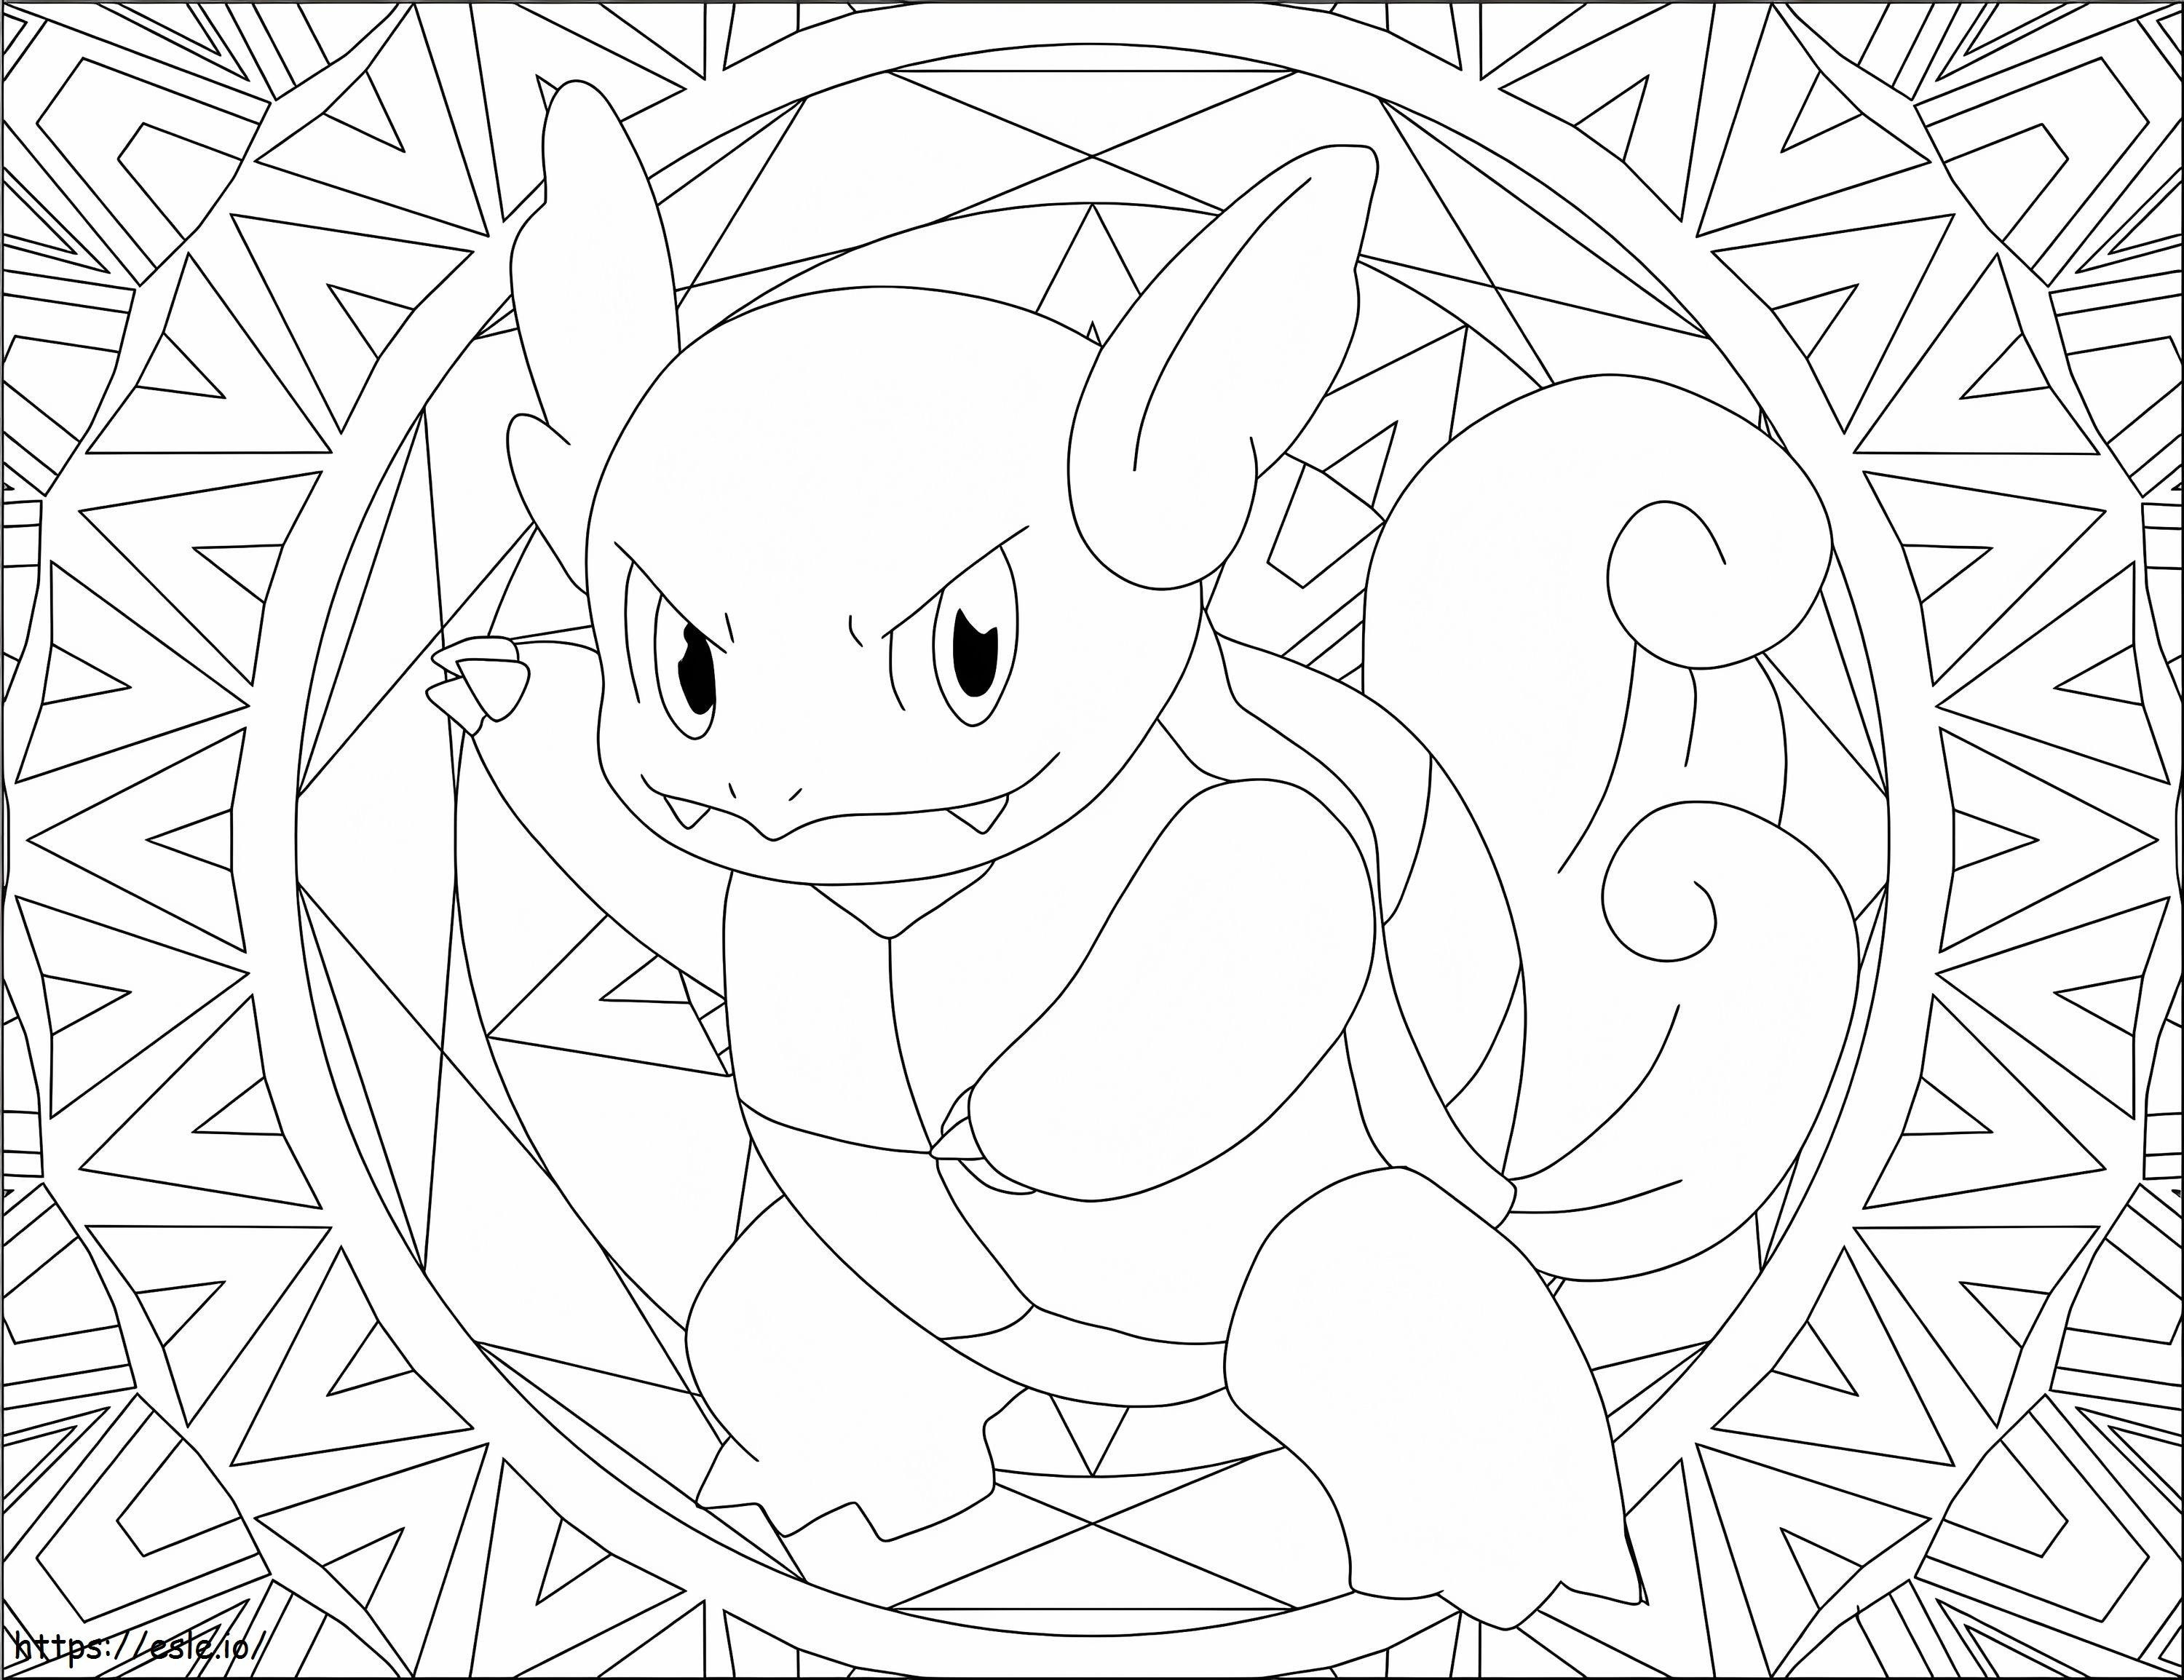 Wartortle 4 coloring page